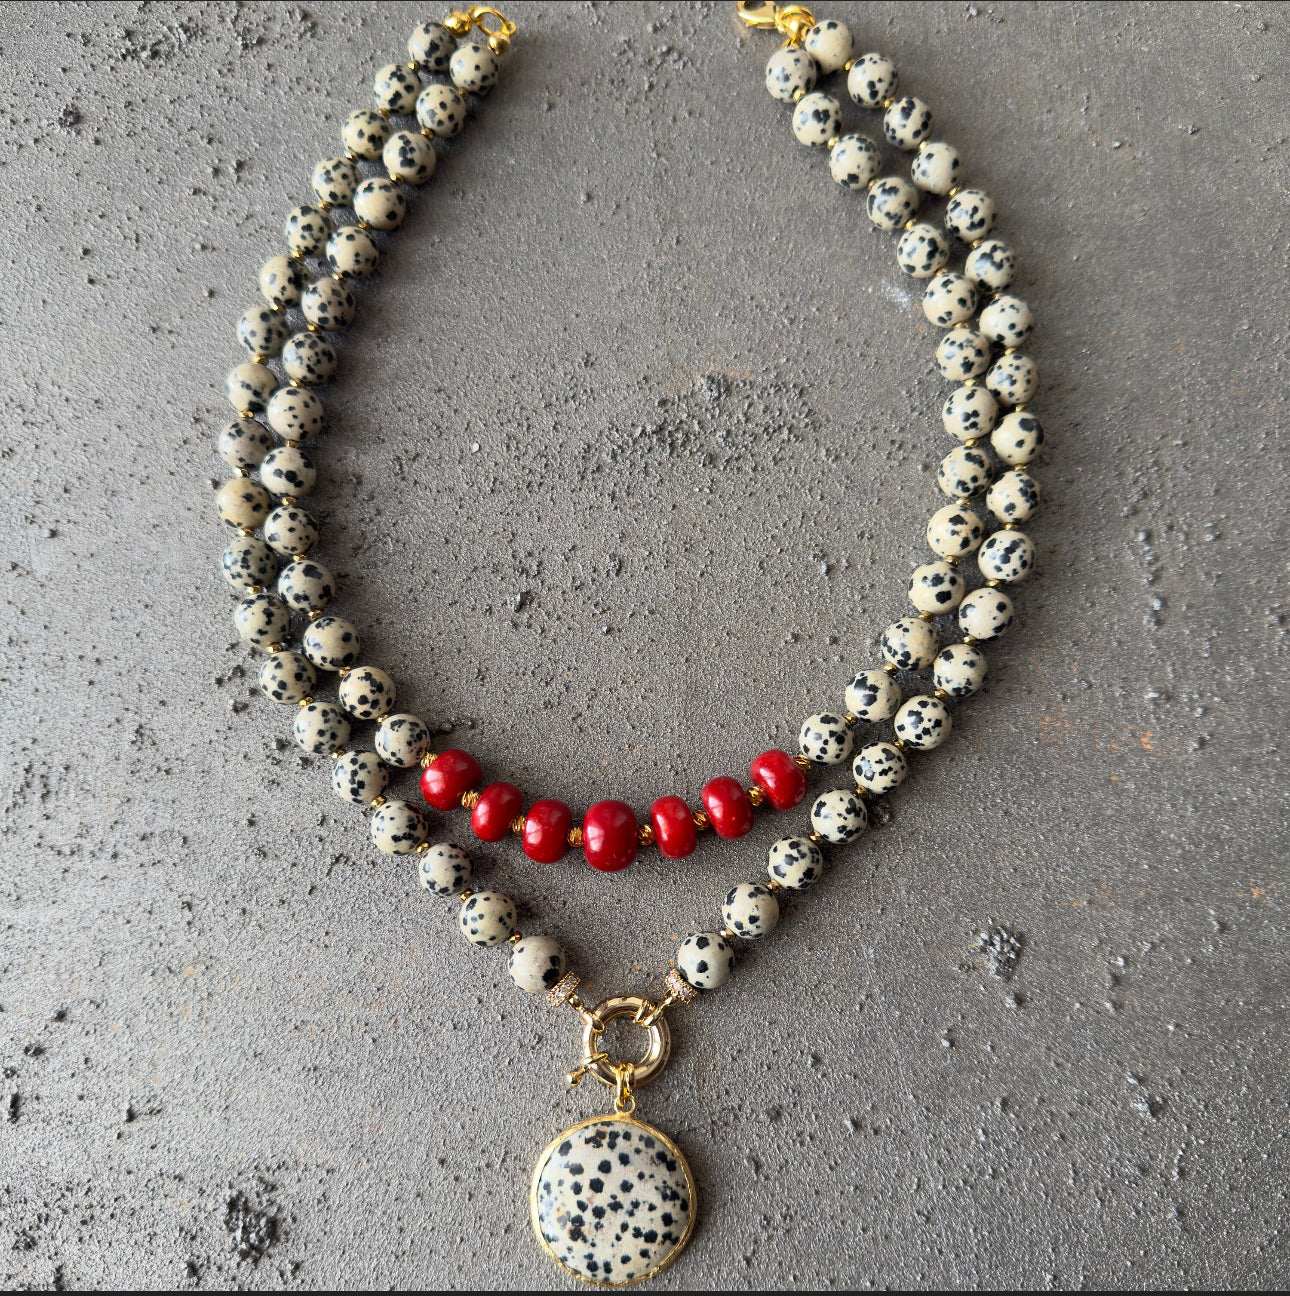 Jasper and Coral Necklace